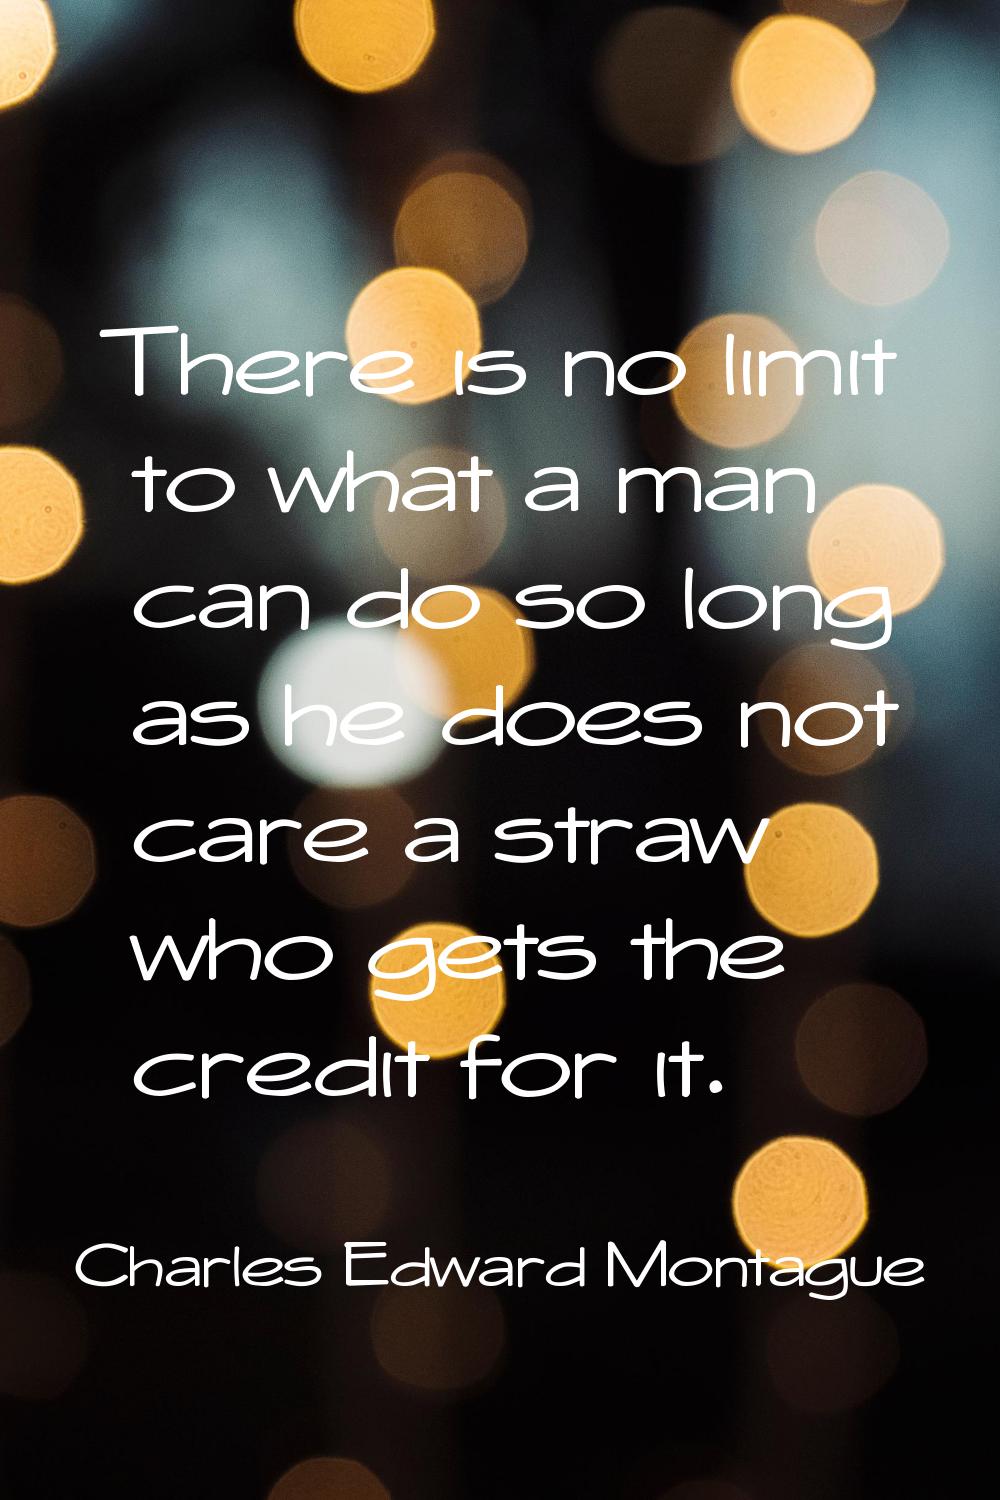 There is no limit to what a man can do so long as he does not care a straw who gets the credit for 